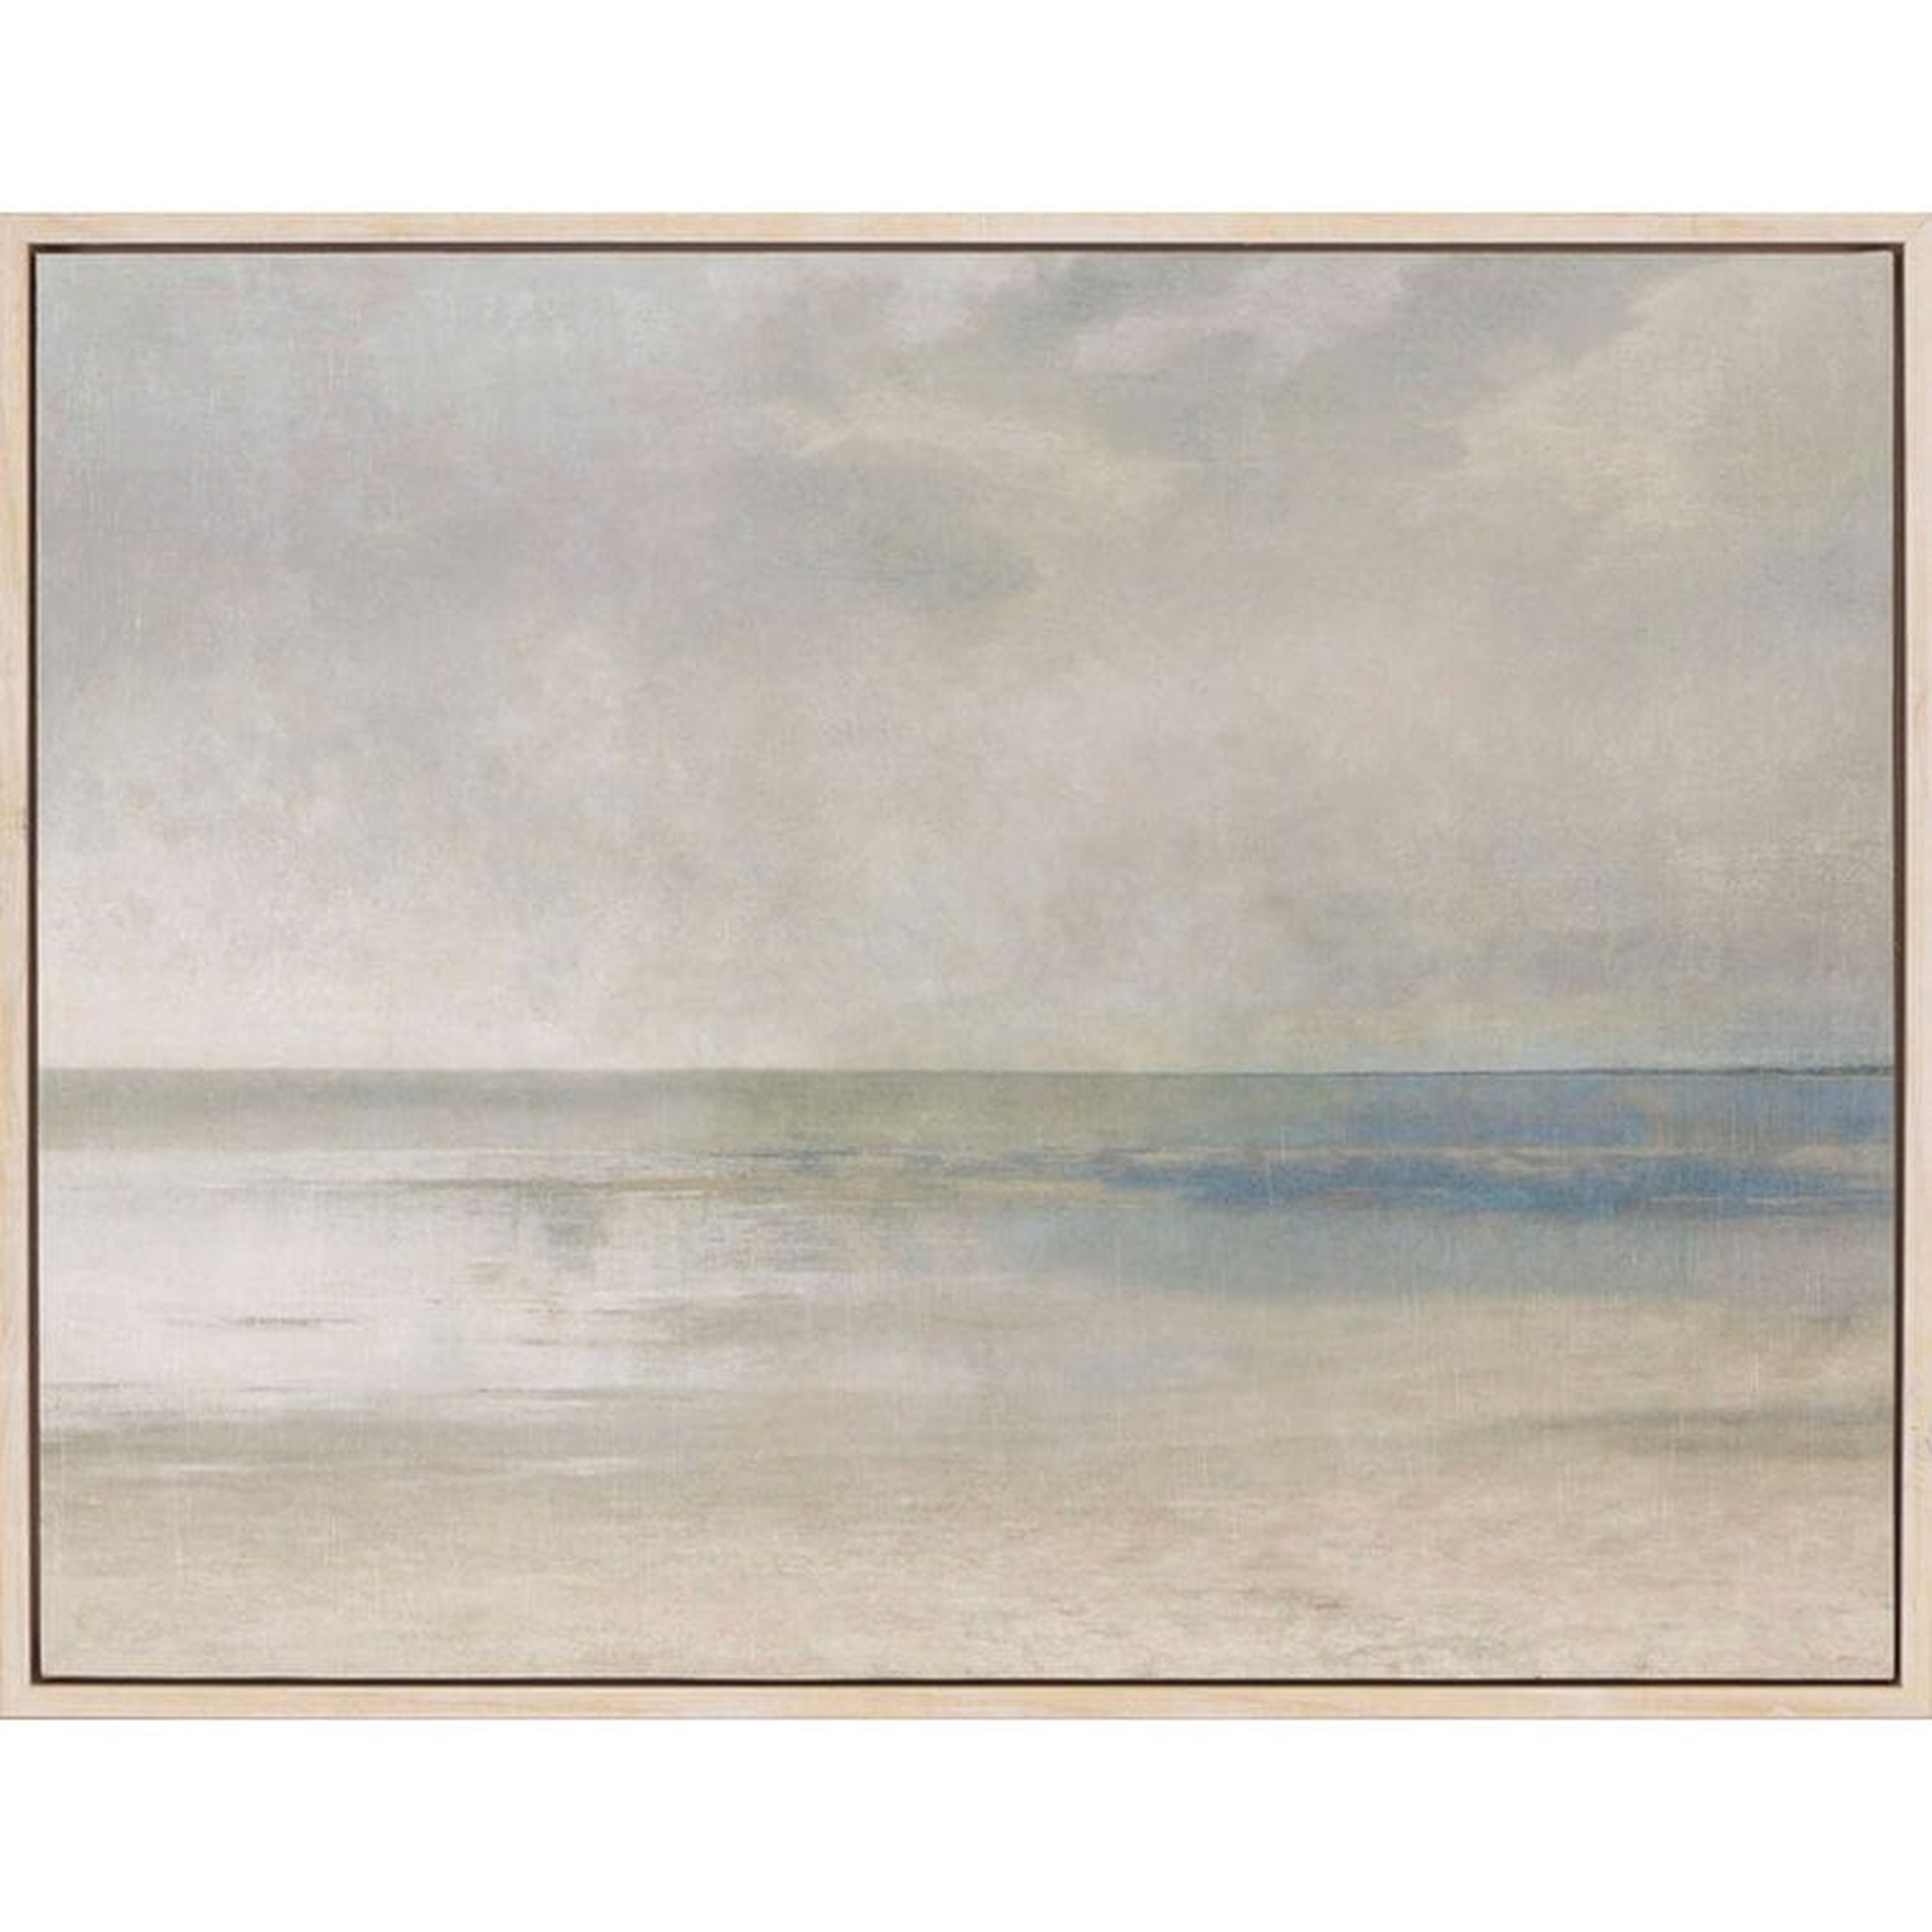 Paragon Pastel Seascape III by McKee - Print on Paper - Perigold